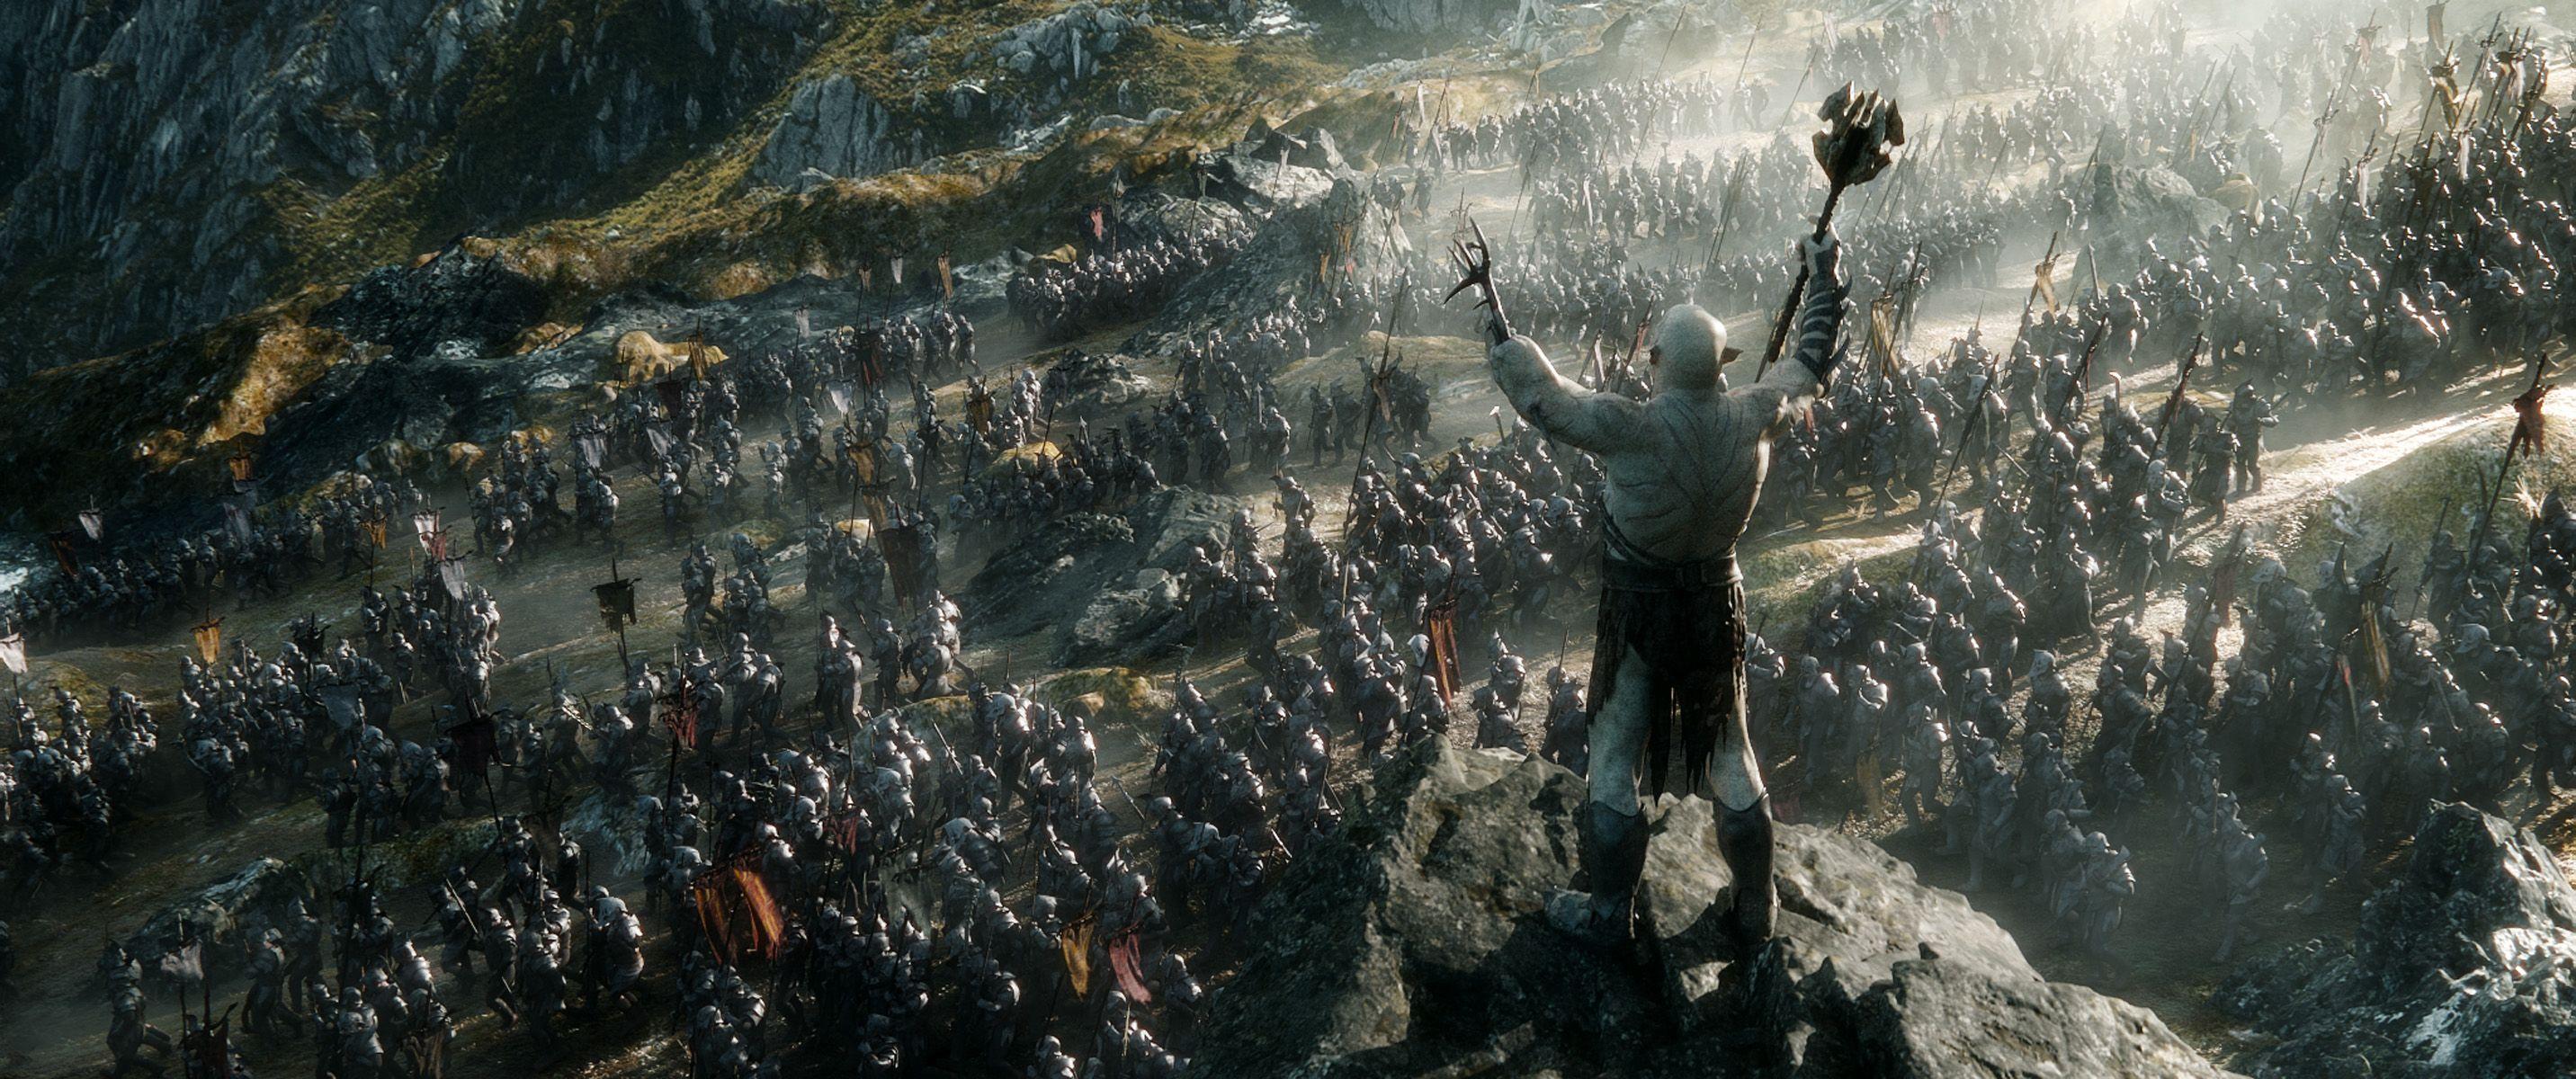 The Hobbit: The Battle of the Five Armies HD Wallpaper. Background